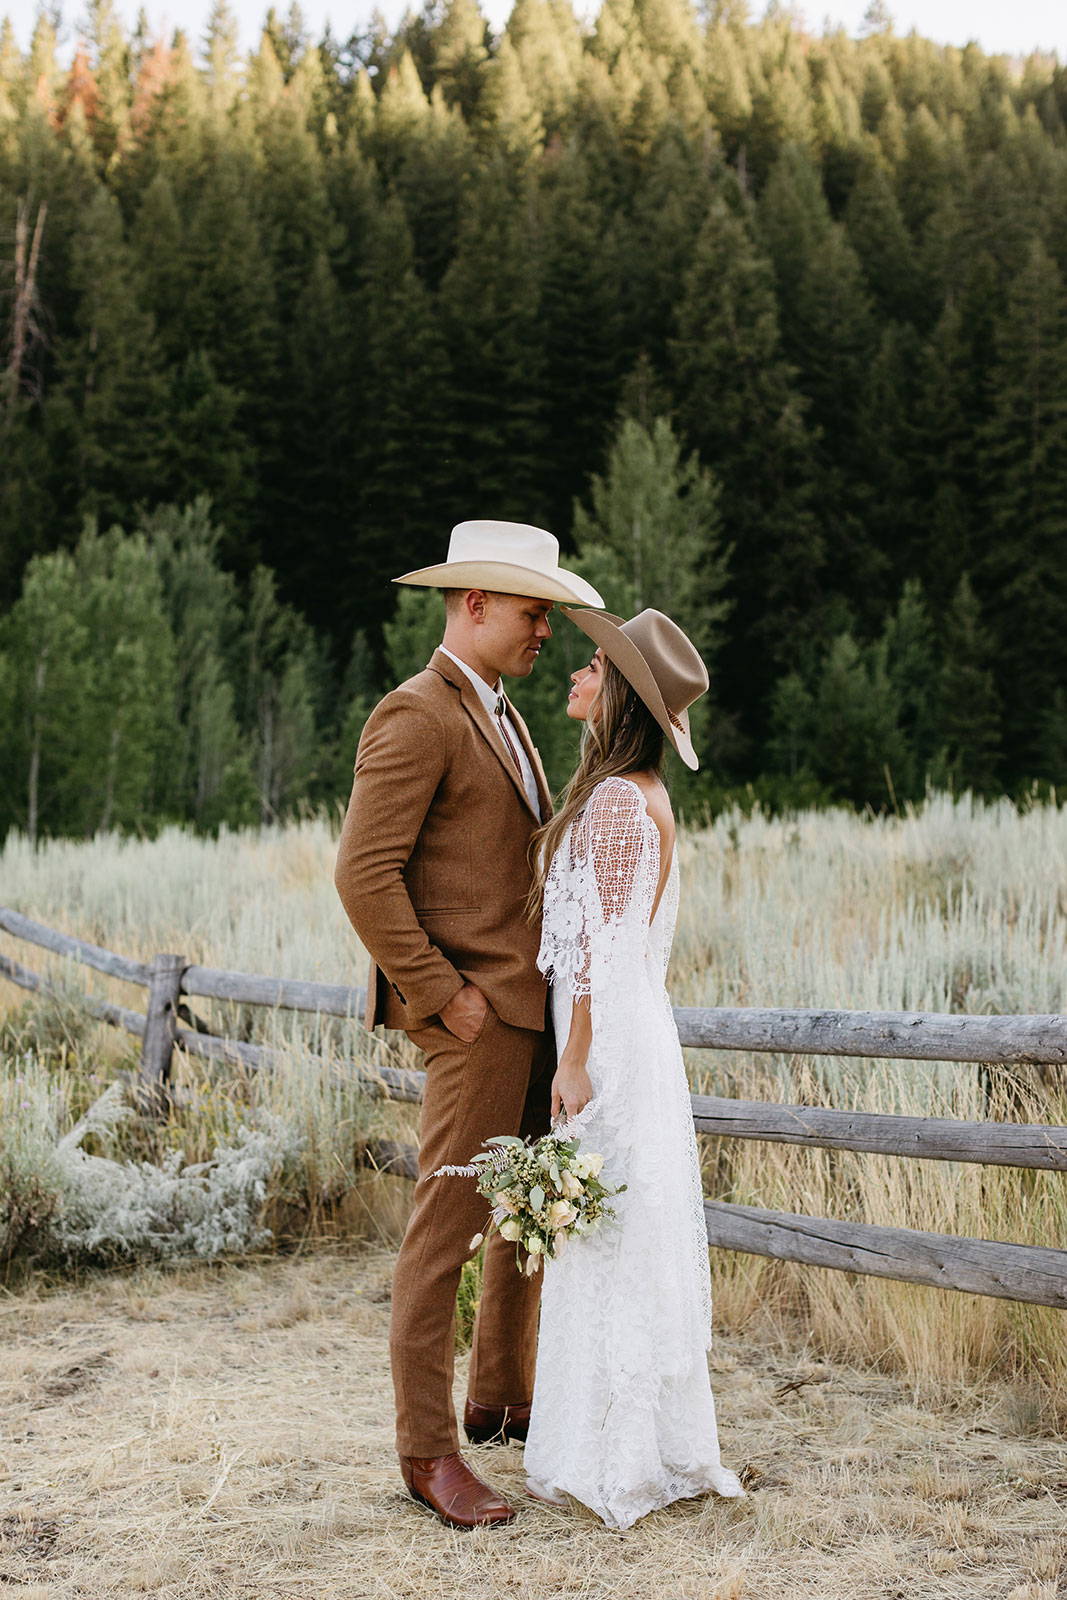 Bride and Groom in country hats, looking at each other